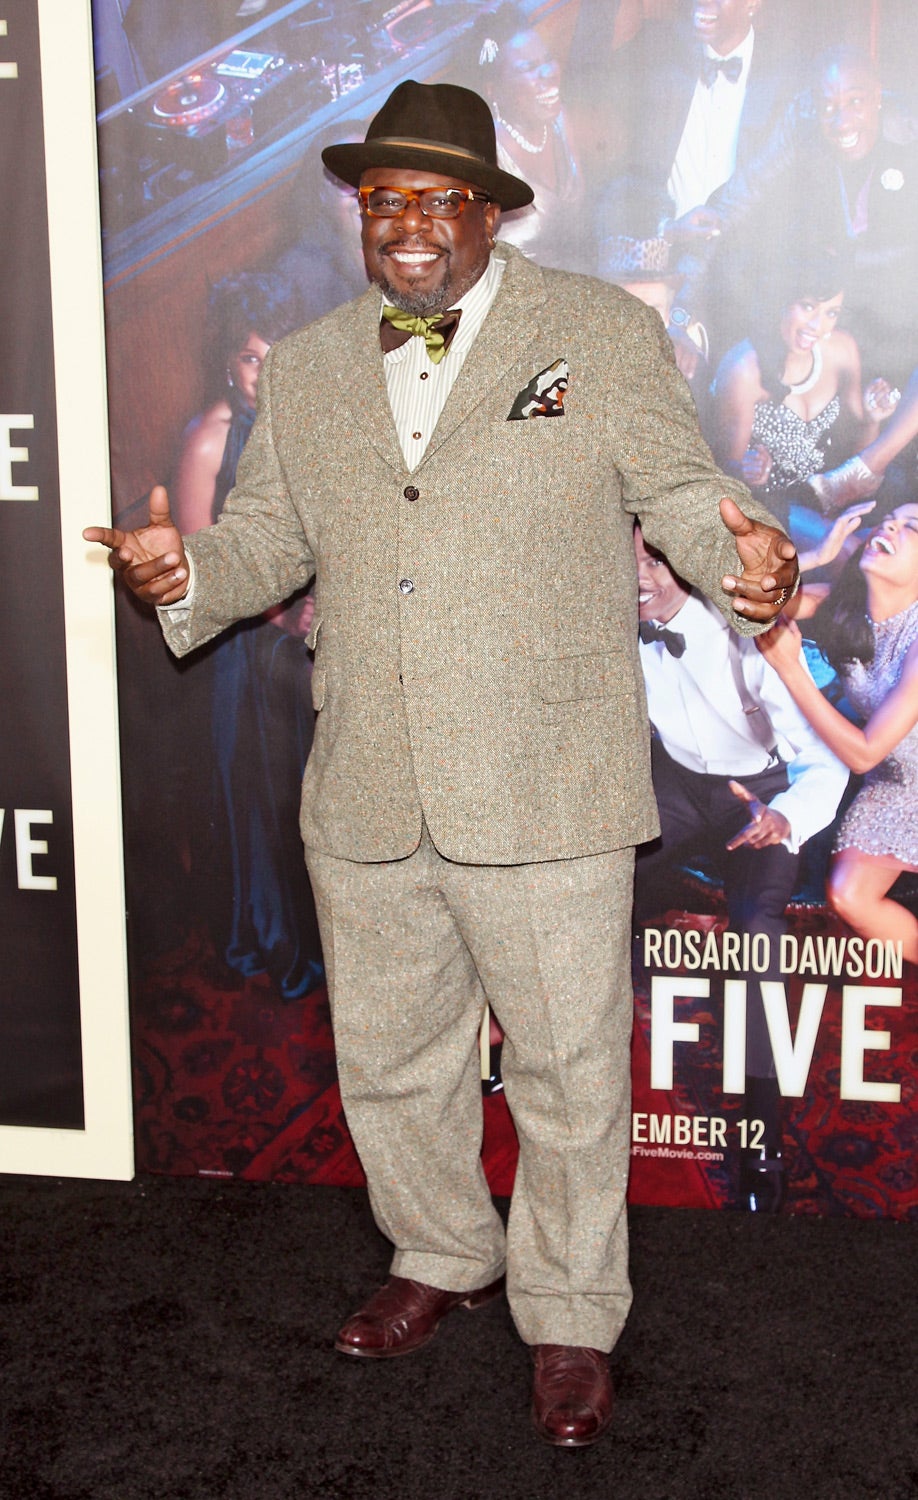 Cedric the Entertainer Says He's Often Mistaken for a Fellow 'King of Comedy'